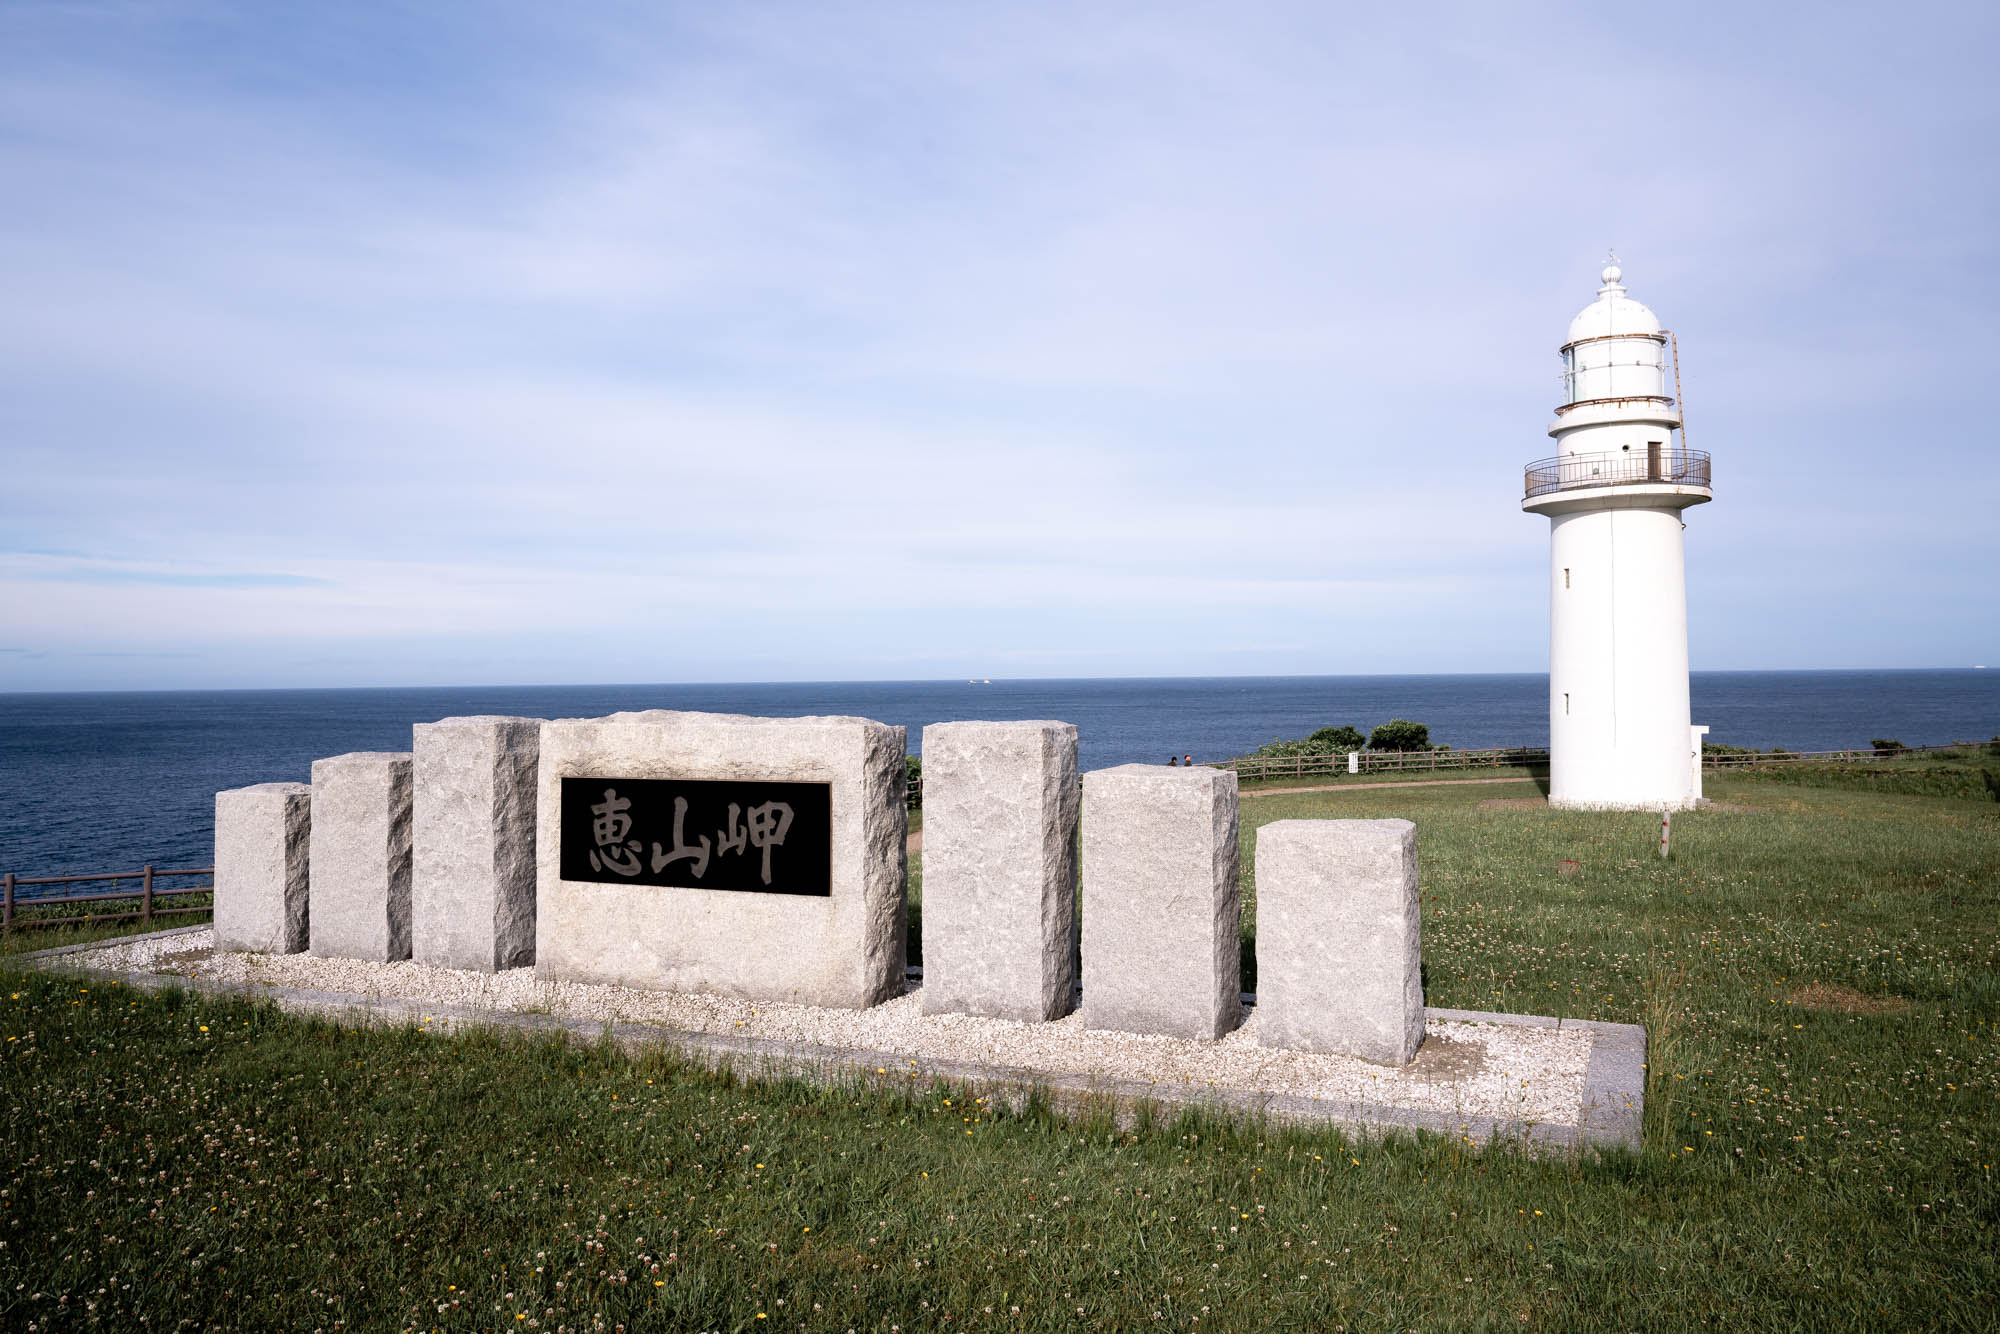 The lighthouse sign